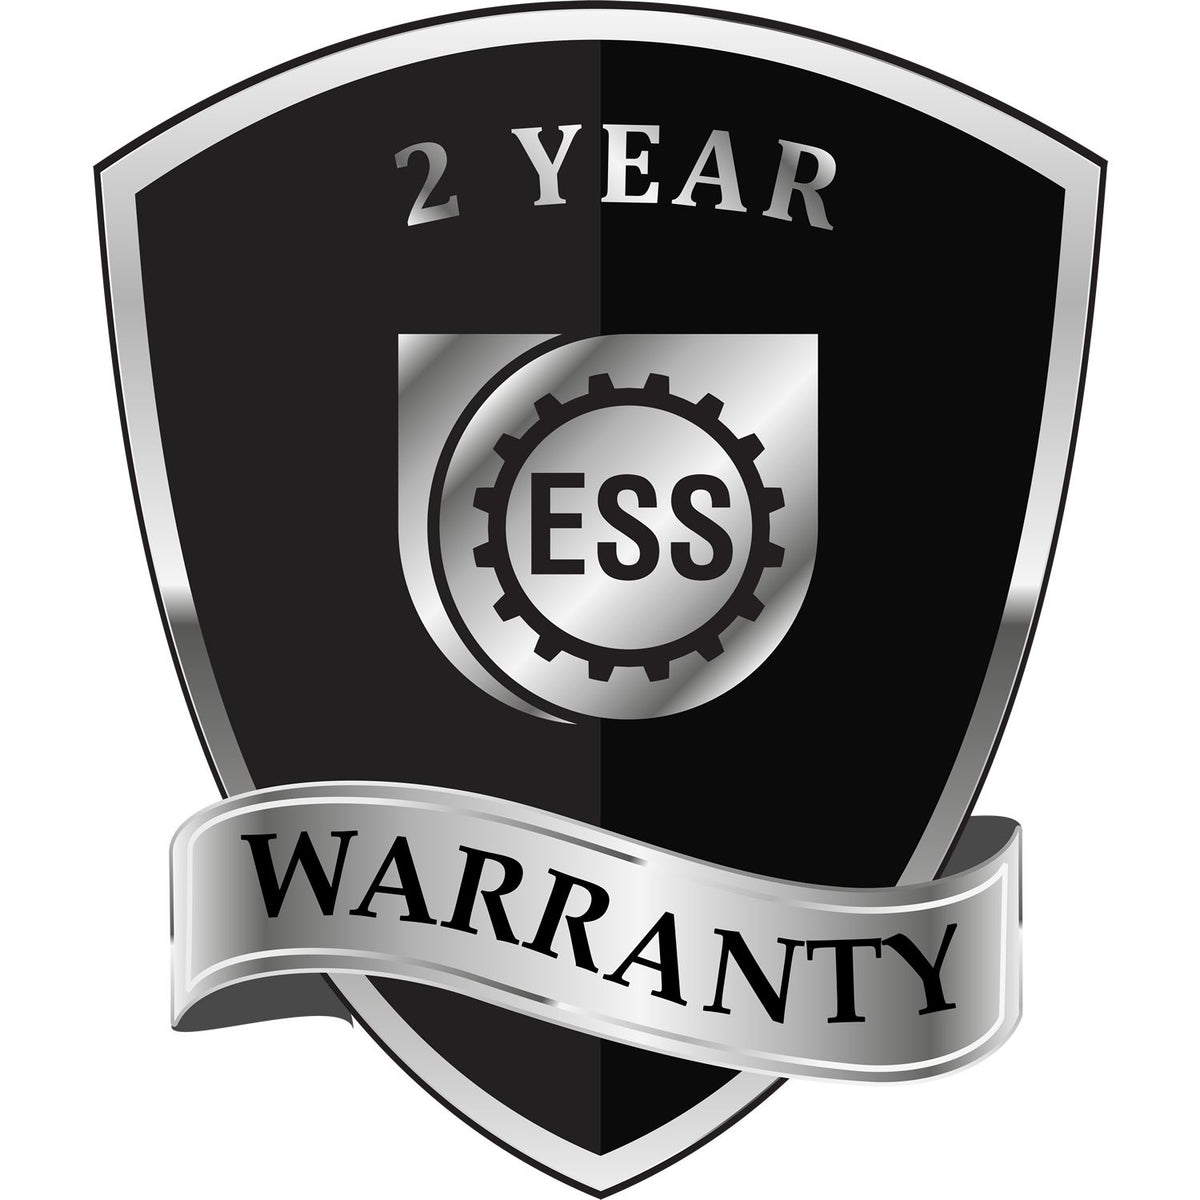 A badge or emblem showing a warranty icon for the State of Oklahoma Extended Long Reach Engineer Seal